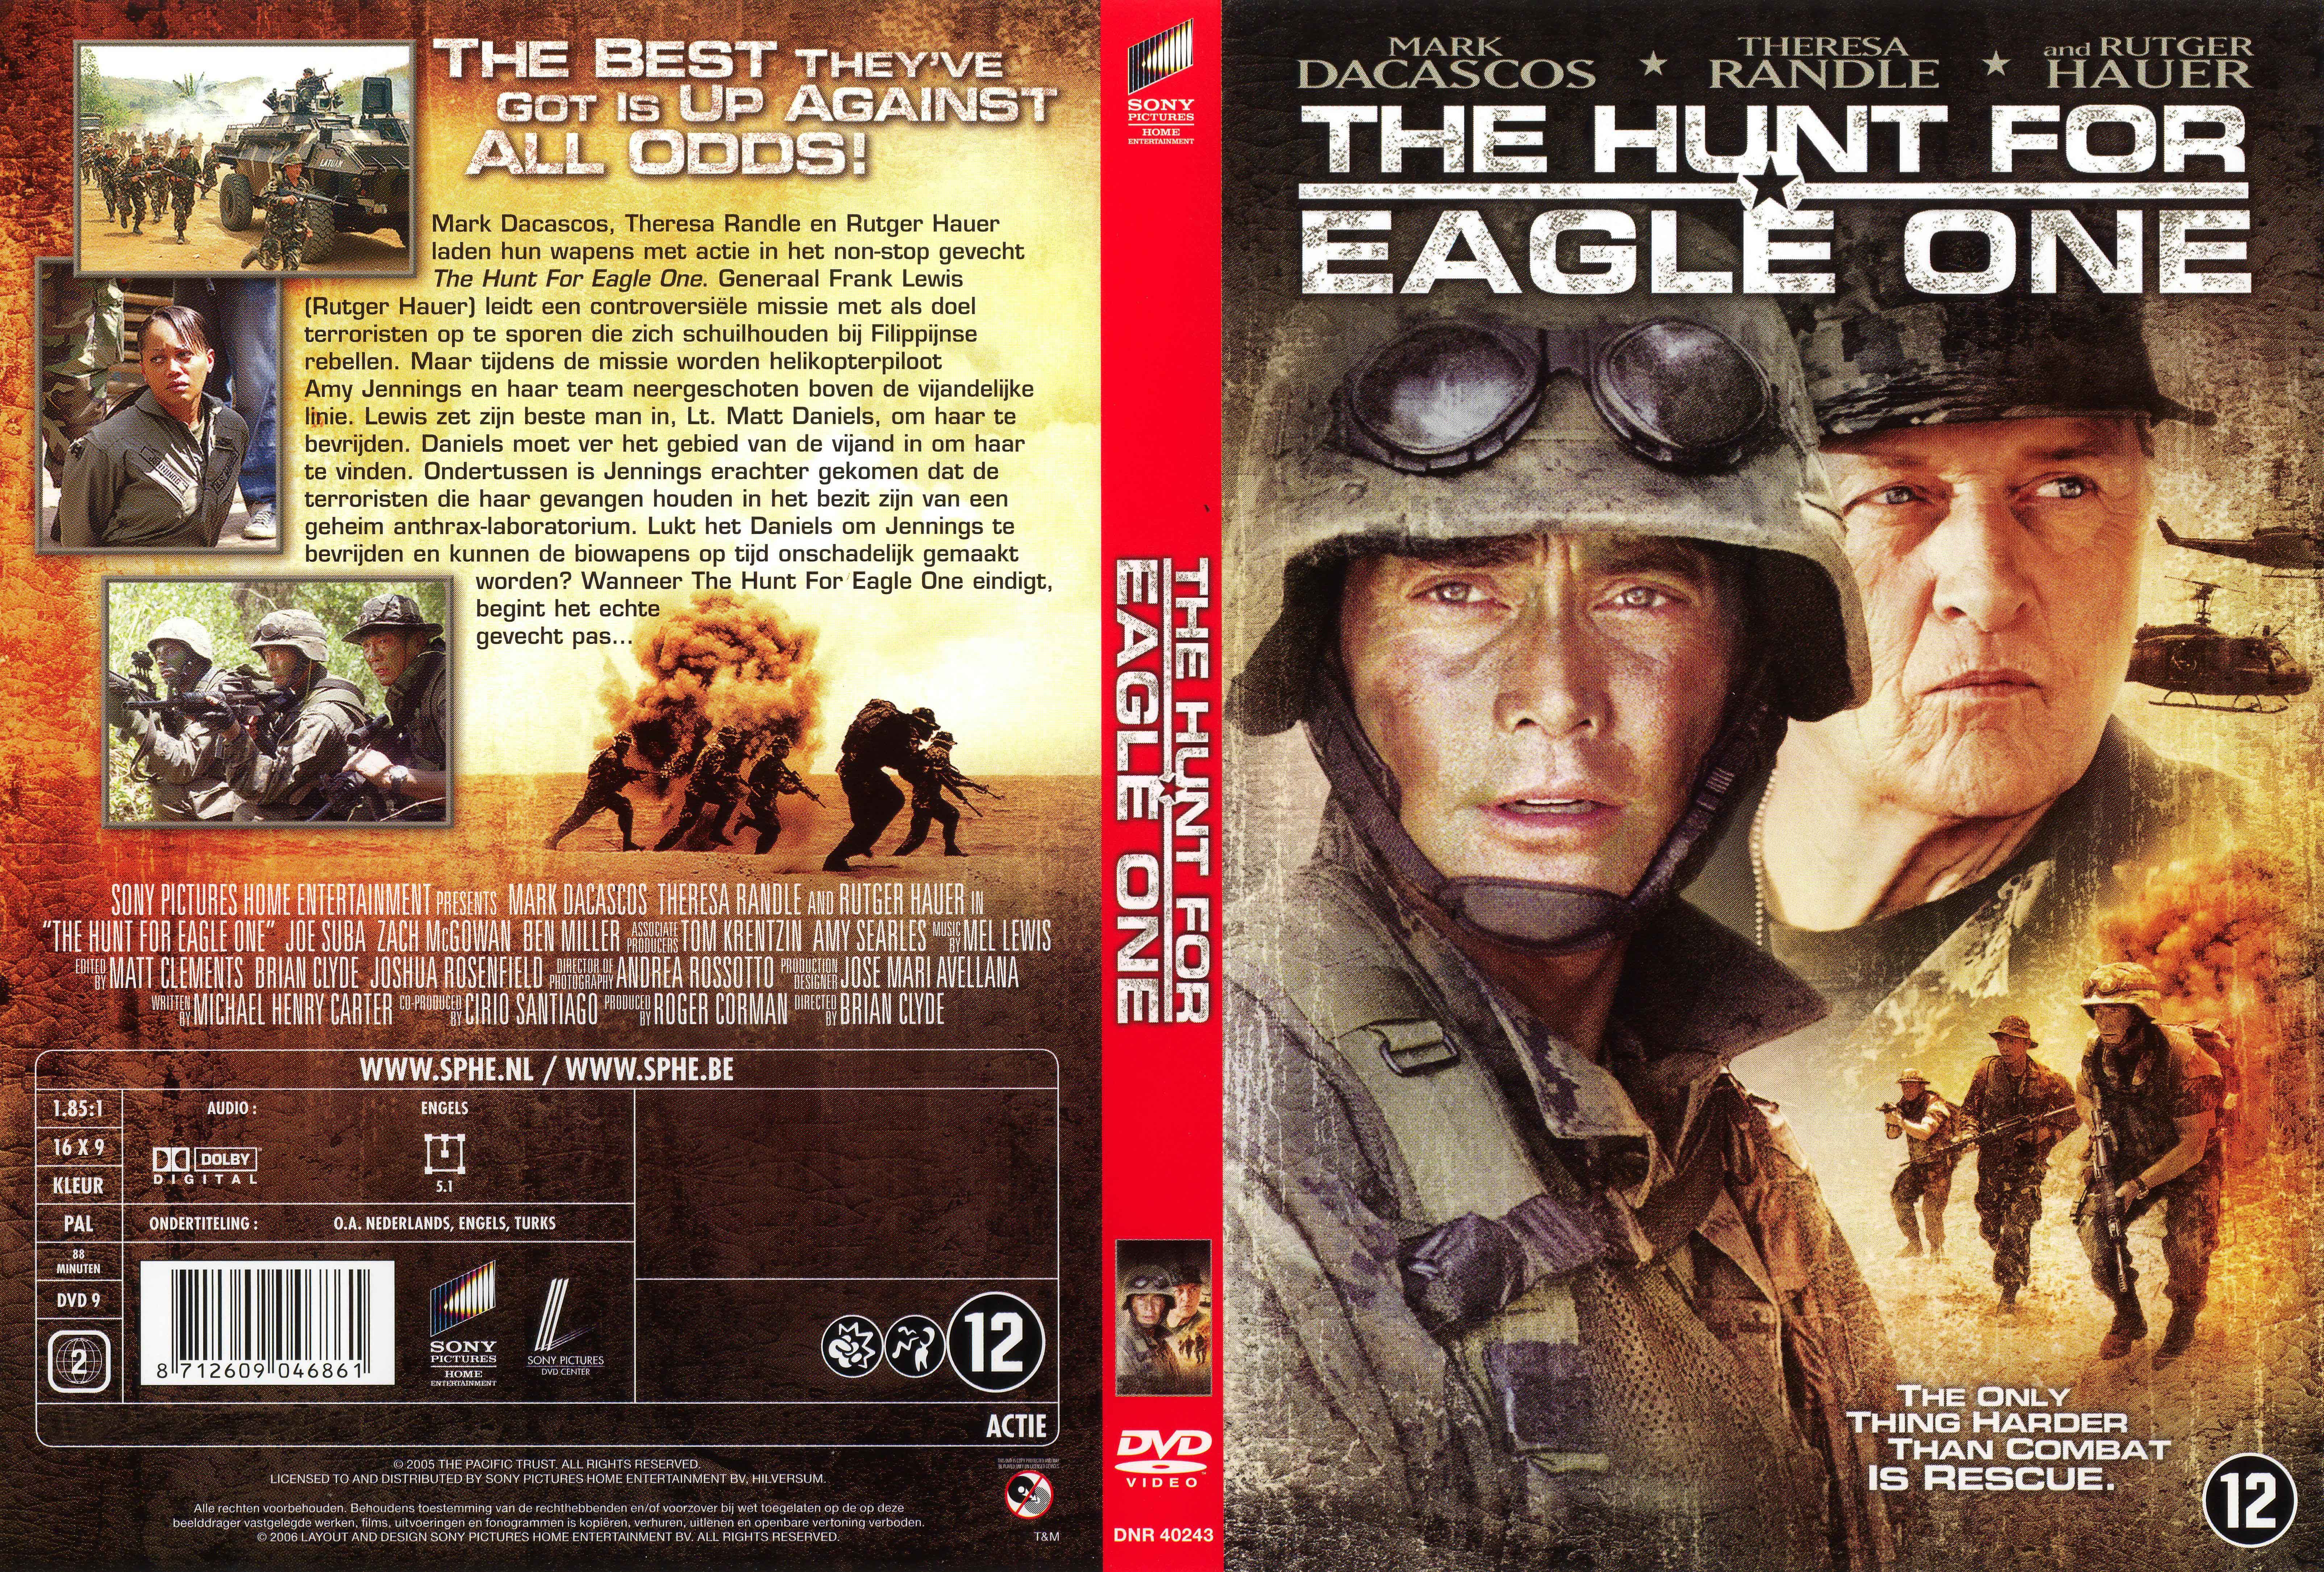 The Hunt For Eagle One